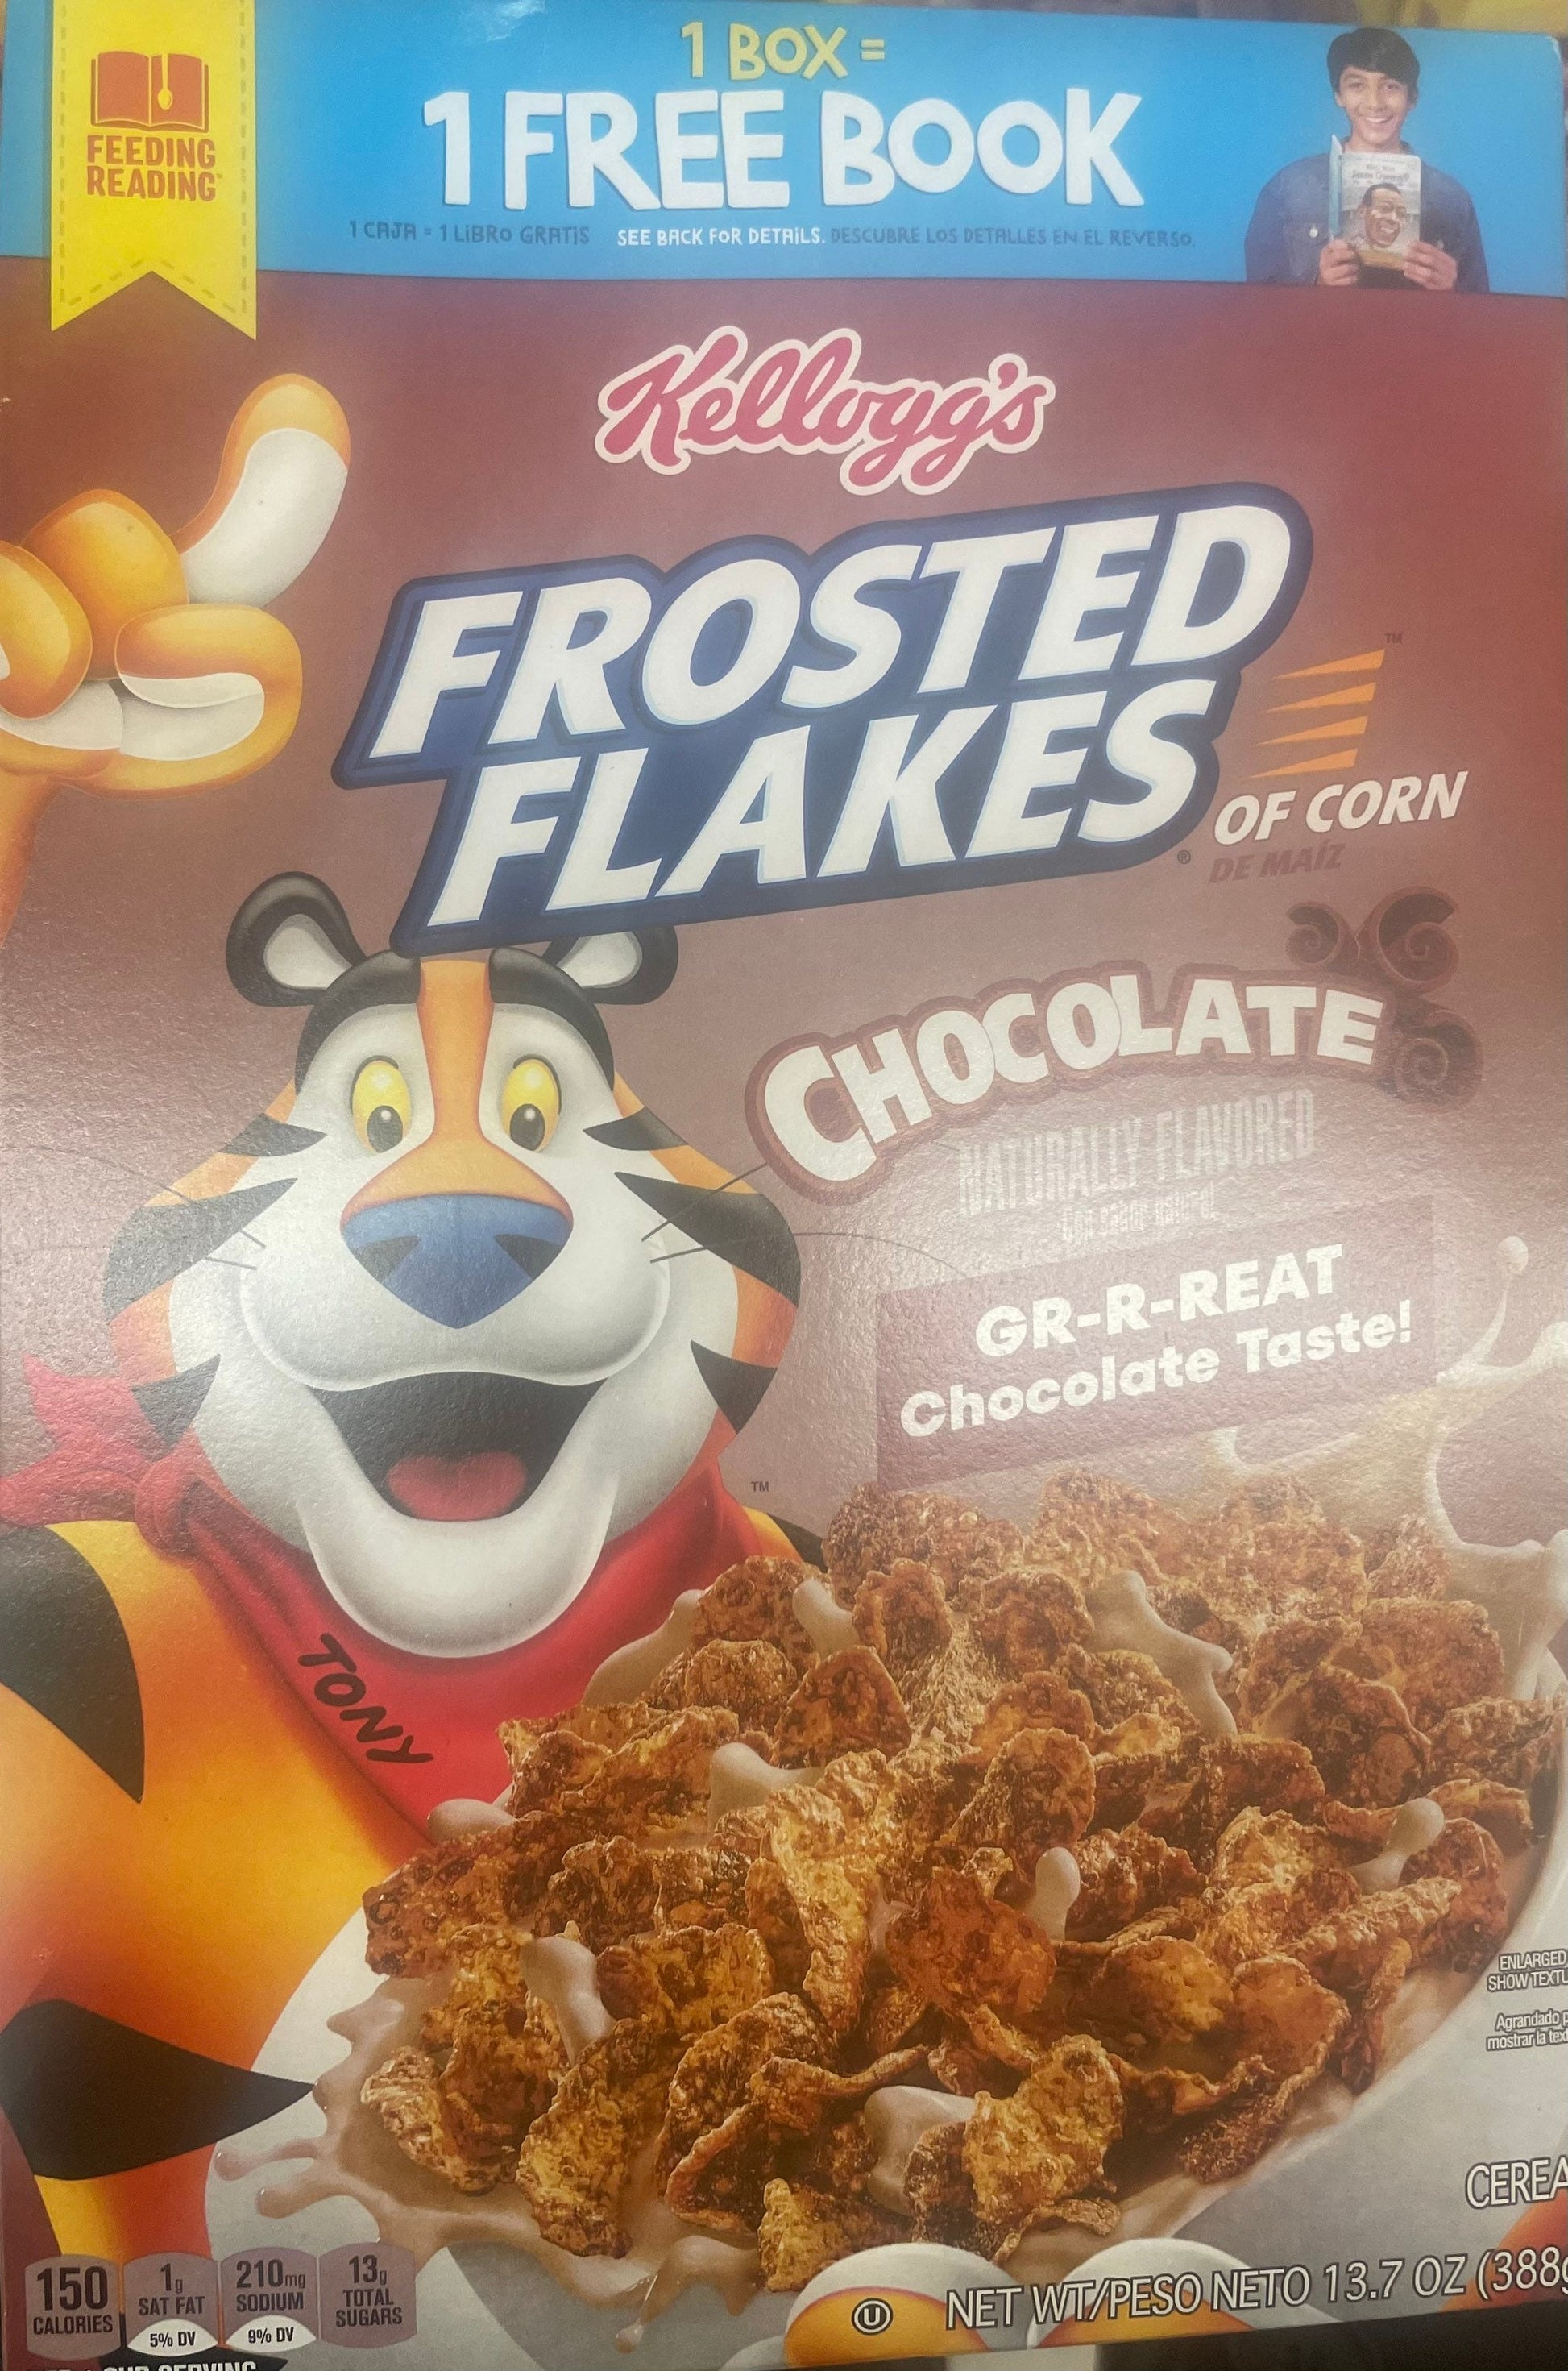 Kellogg's launches Chocolate Flavour Corn Flakes